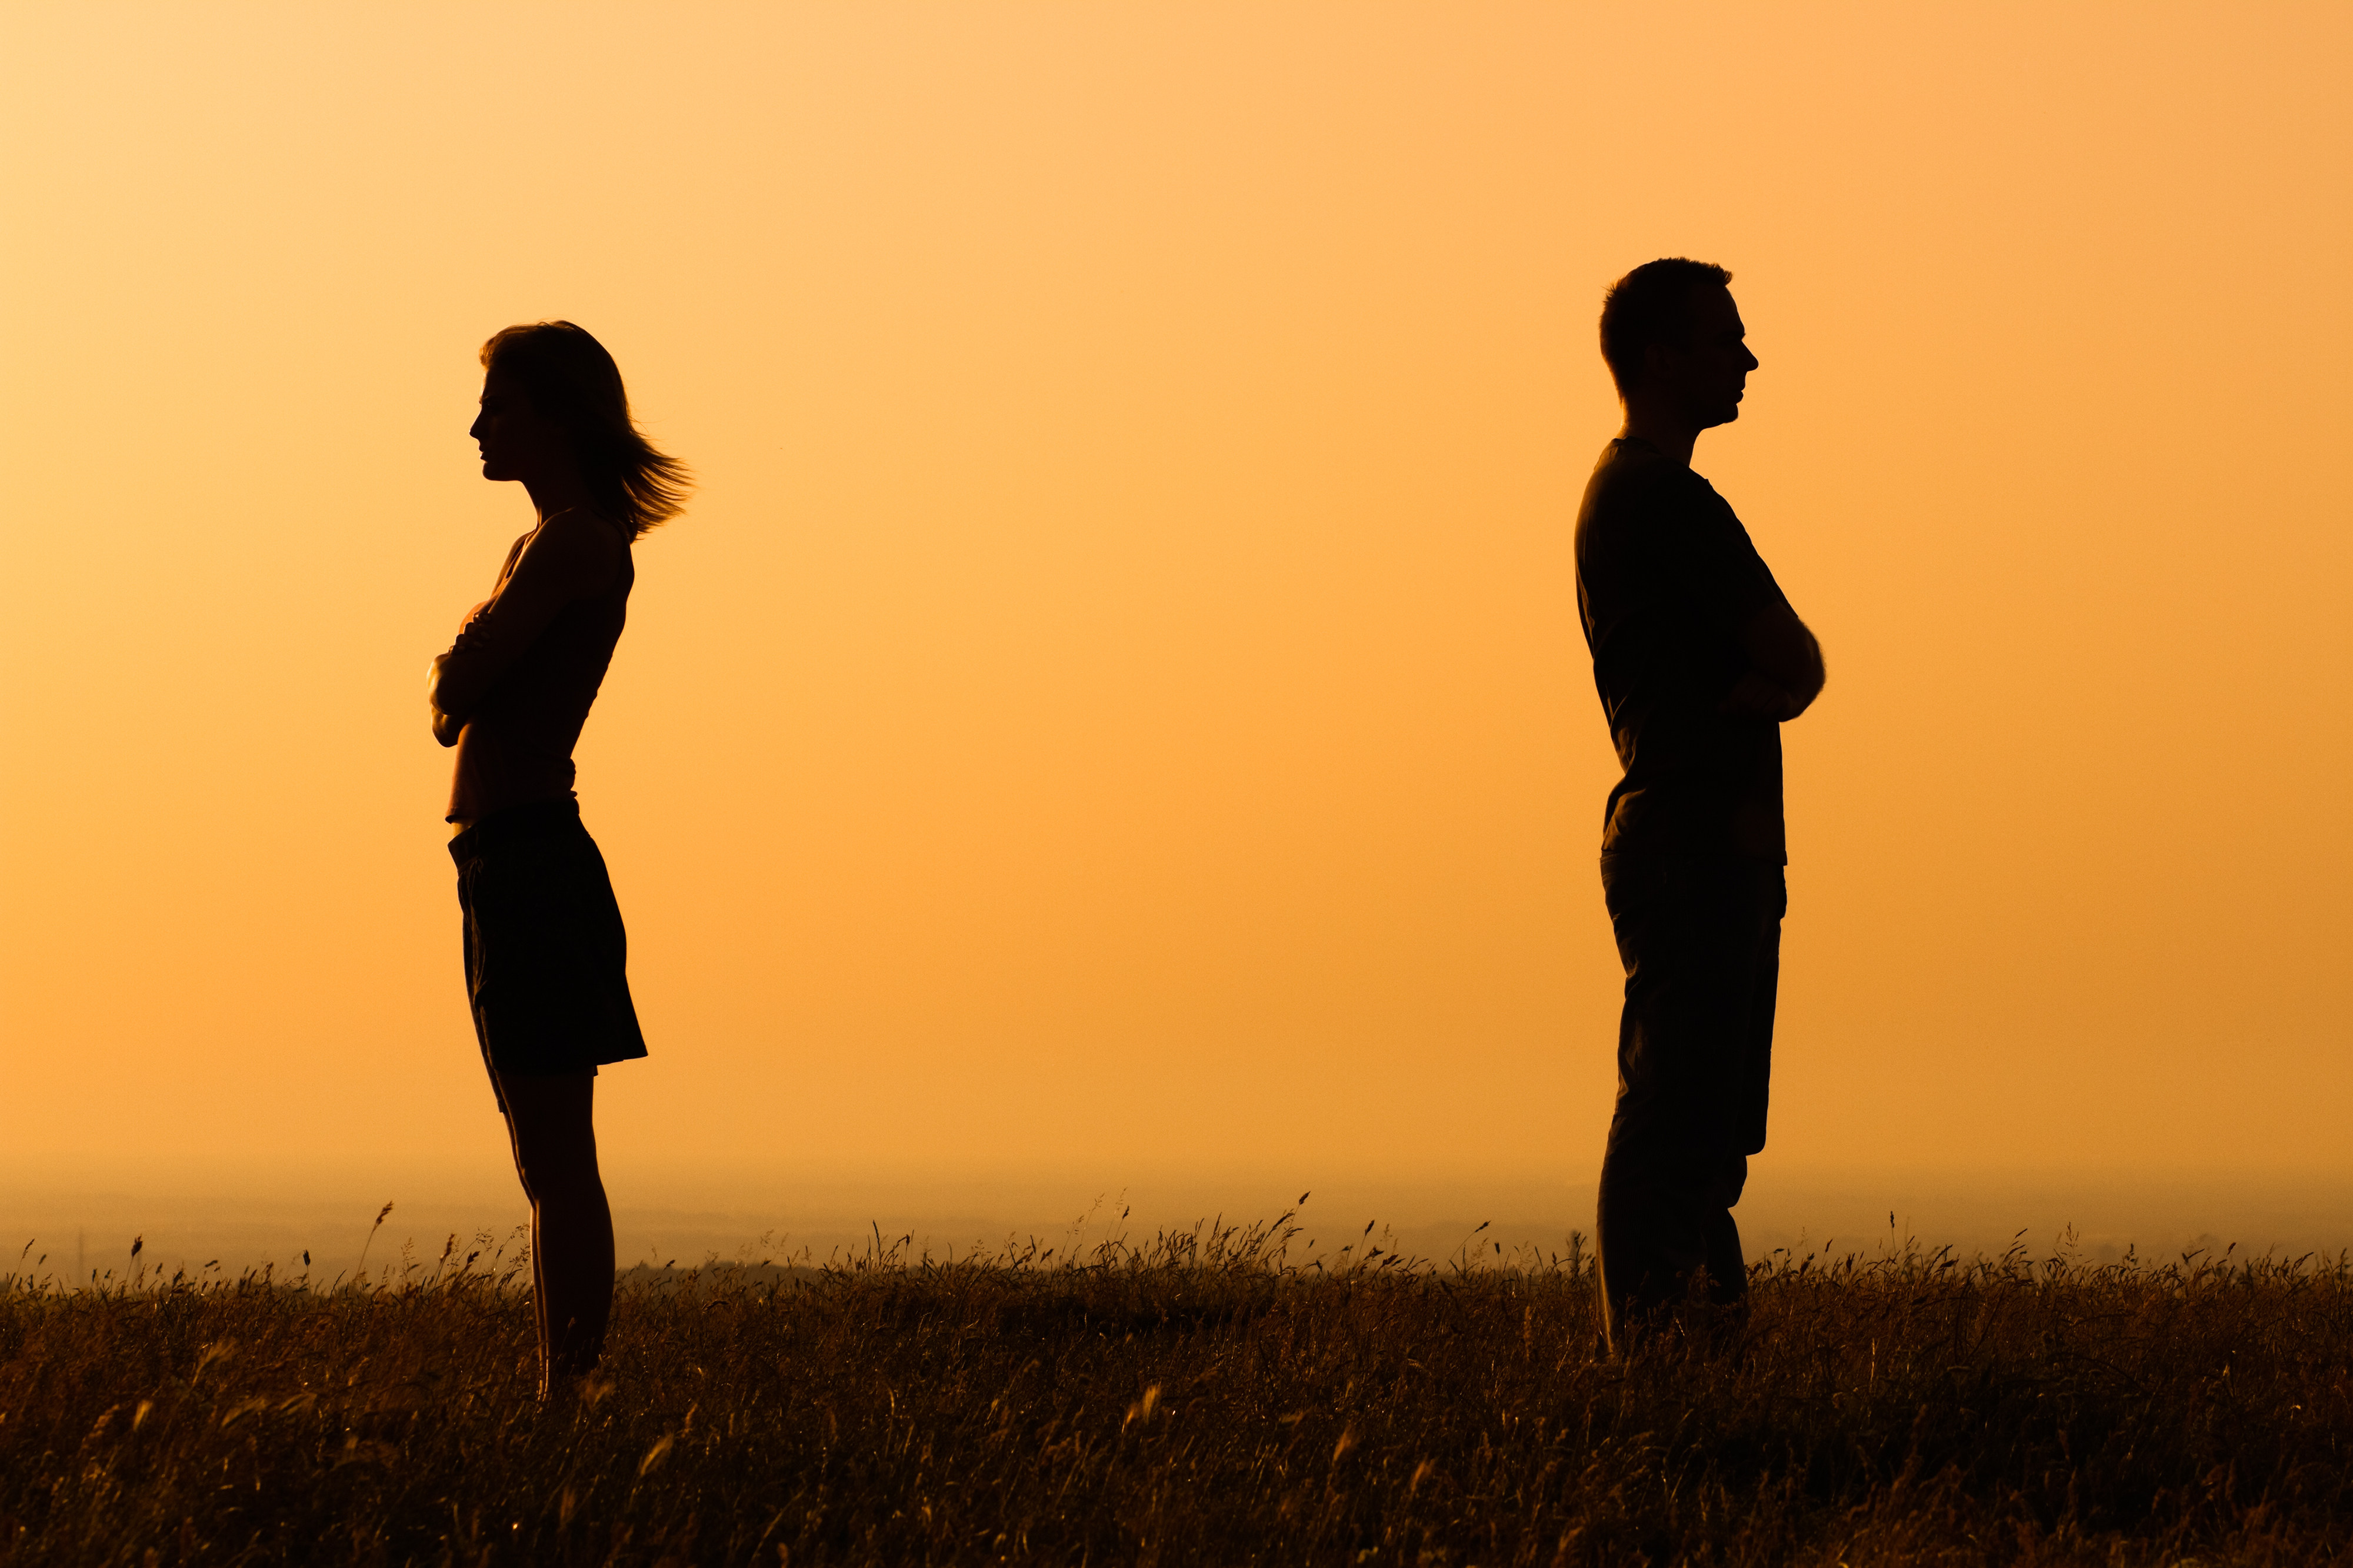 An increasing number of couples aged in their late 30s to late 40s filed for divorce in the past five years, a lawyer said. Photo: Shutterstock